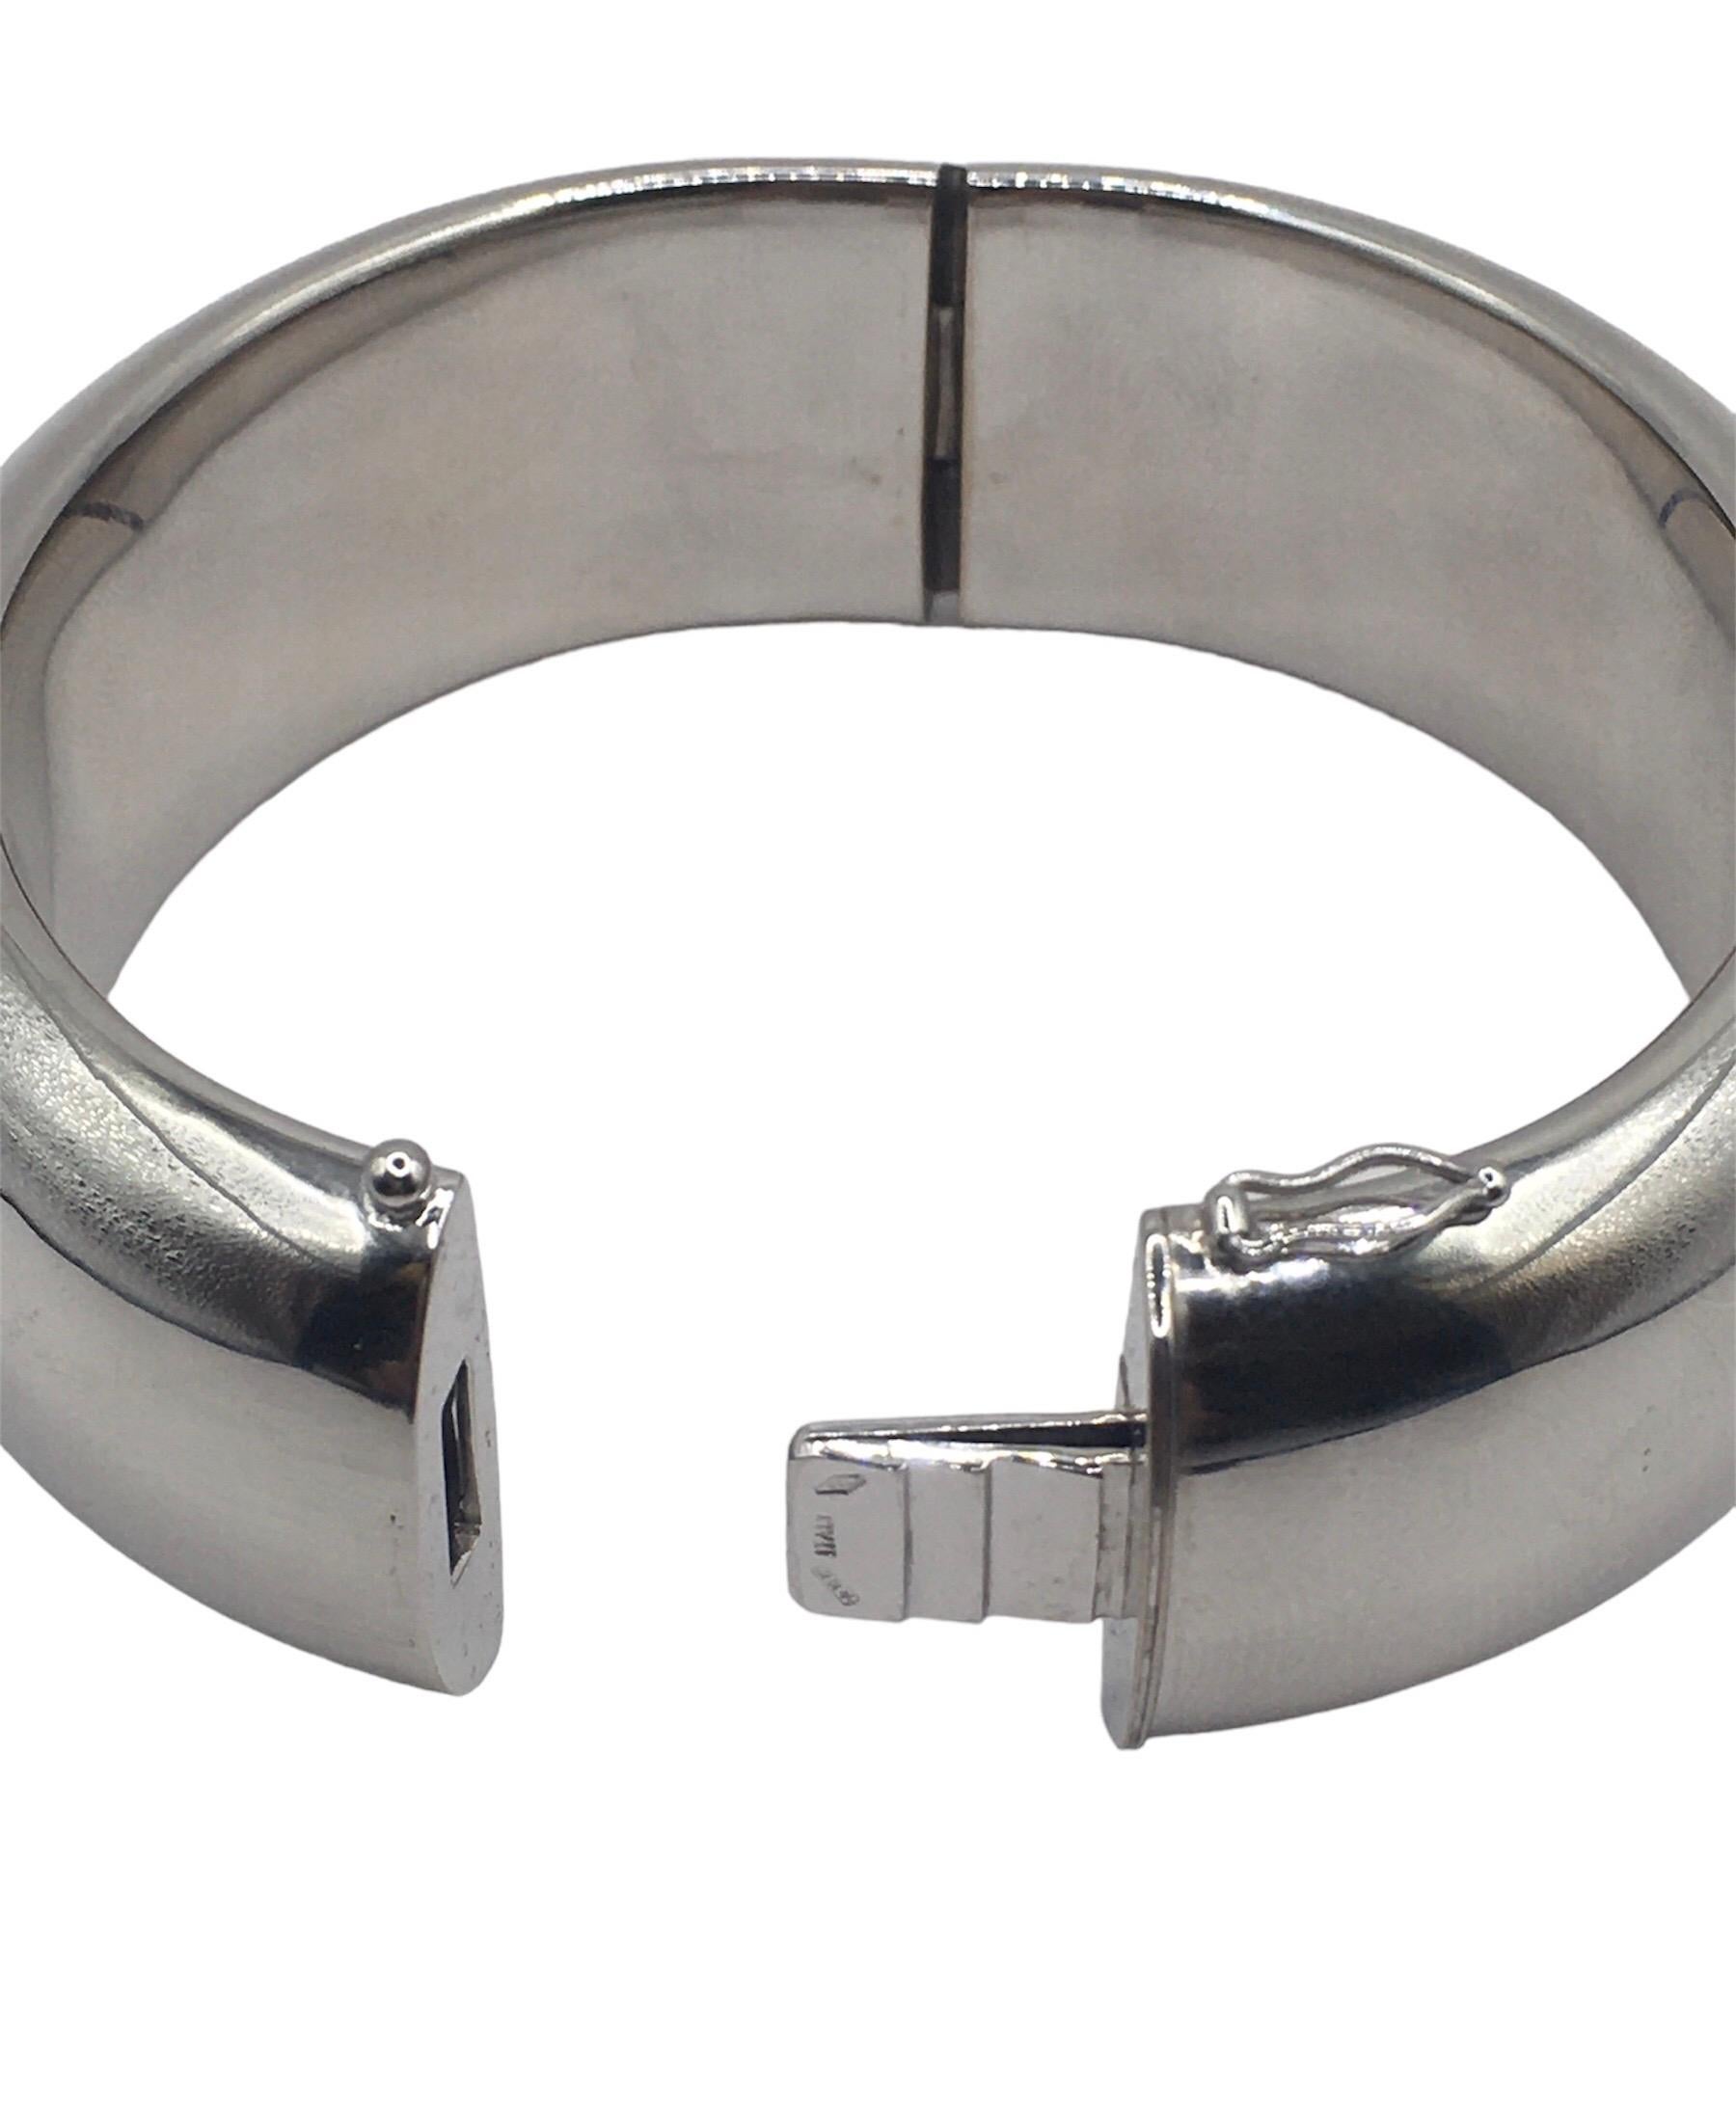 Essence bangle in 18 kt  white gold 
This classic collection in Micheletto tradition 

the total weight of the gold is  gr 71.00

STAMP: 10 MI ITALY 750

The full set is available